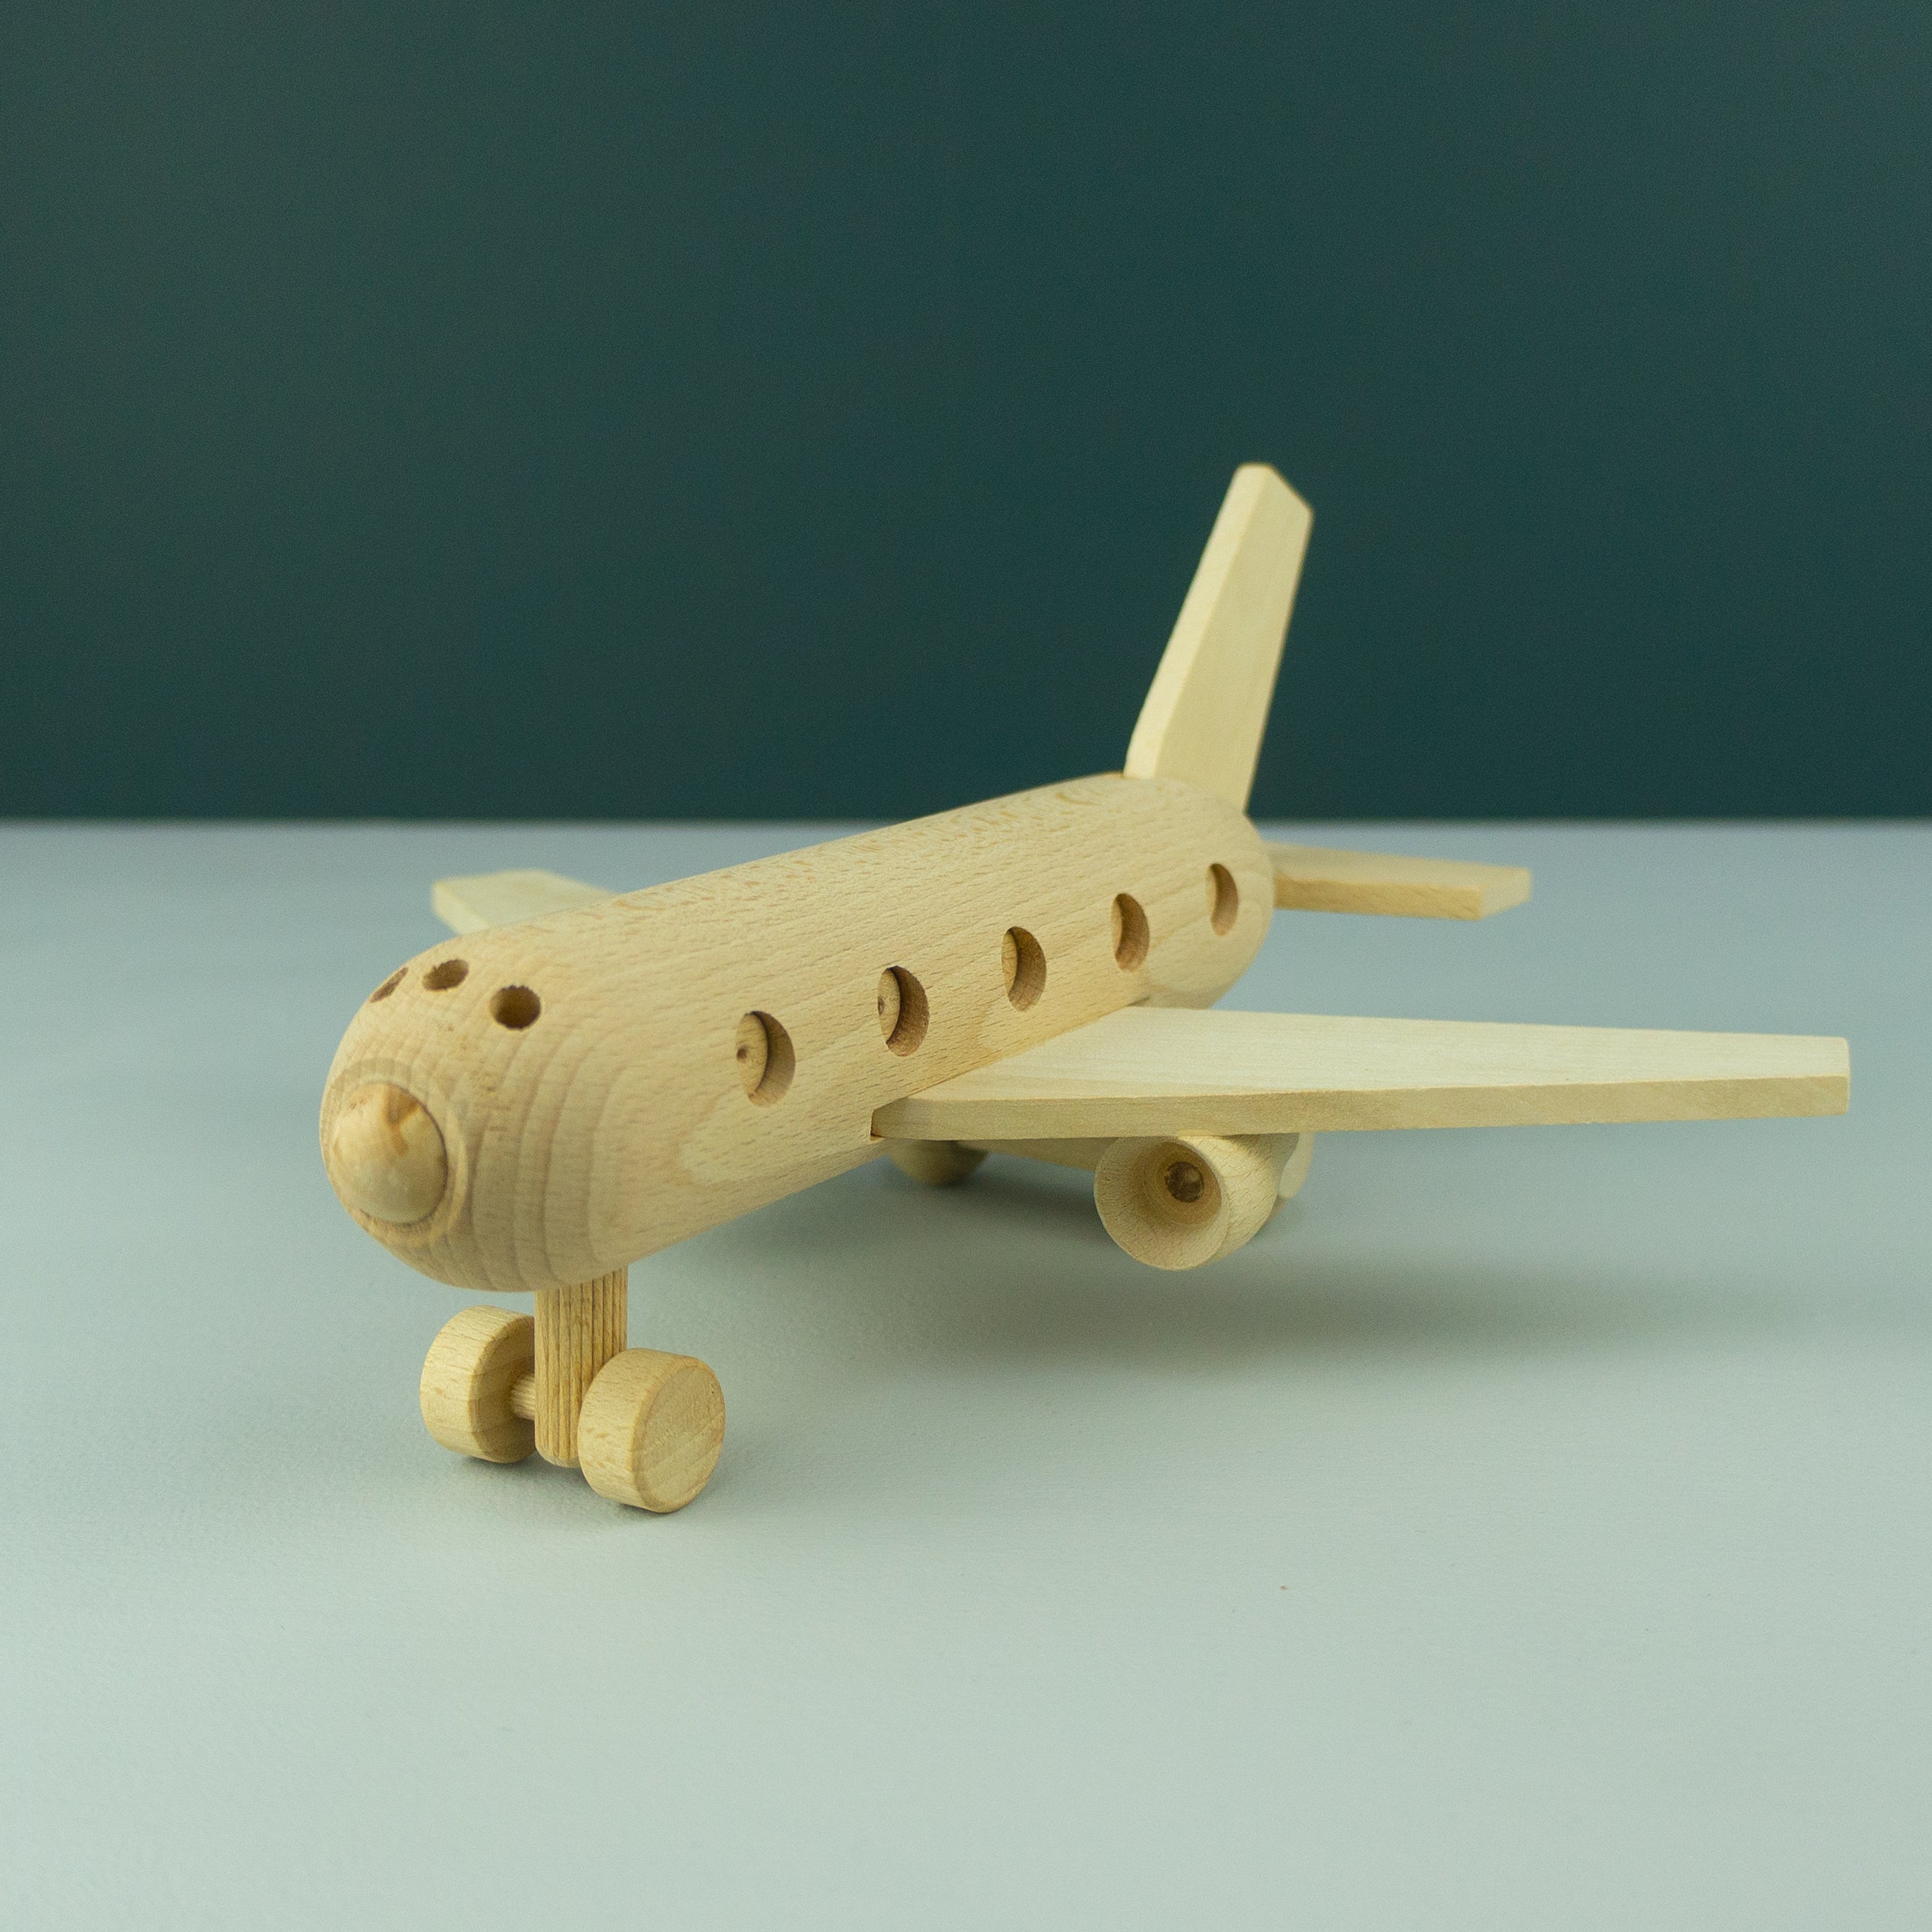 Personalised wooden toy airplane. Handcrafted wood play airline passenger plane